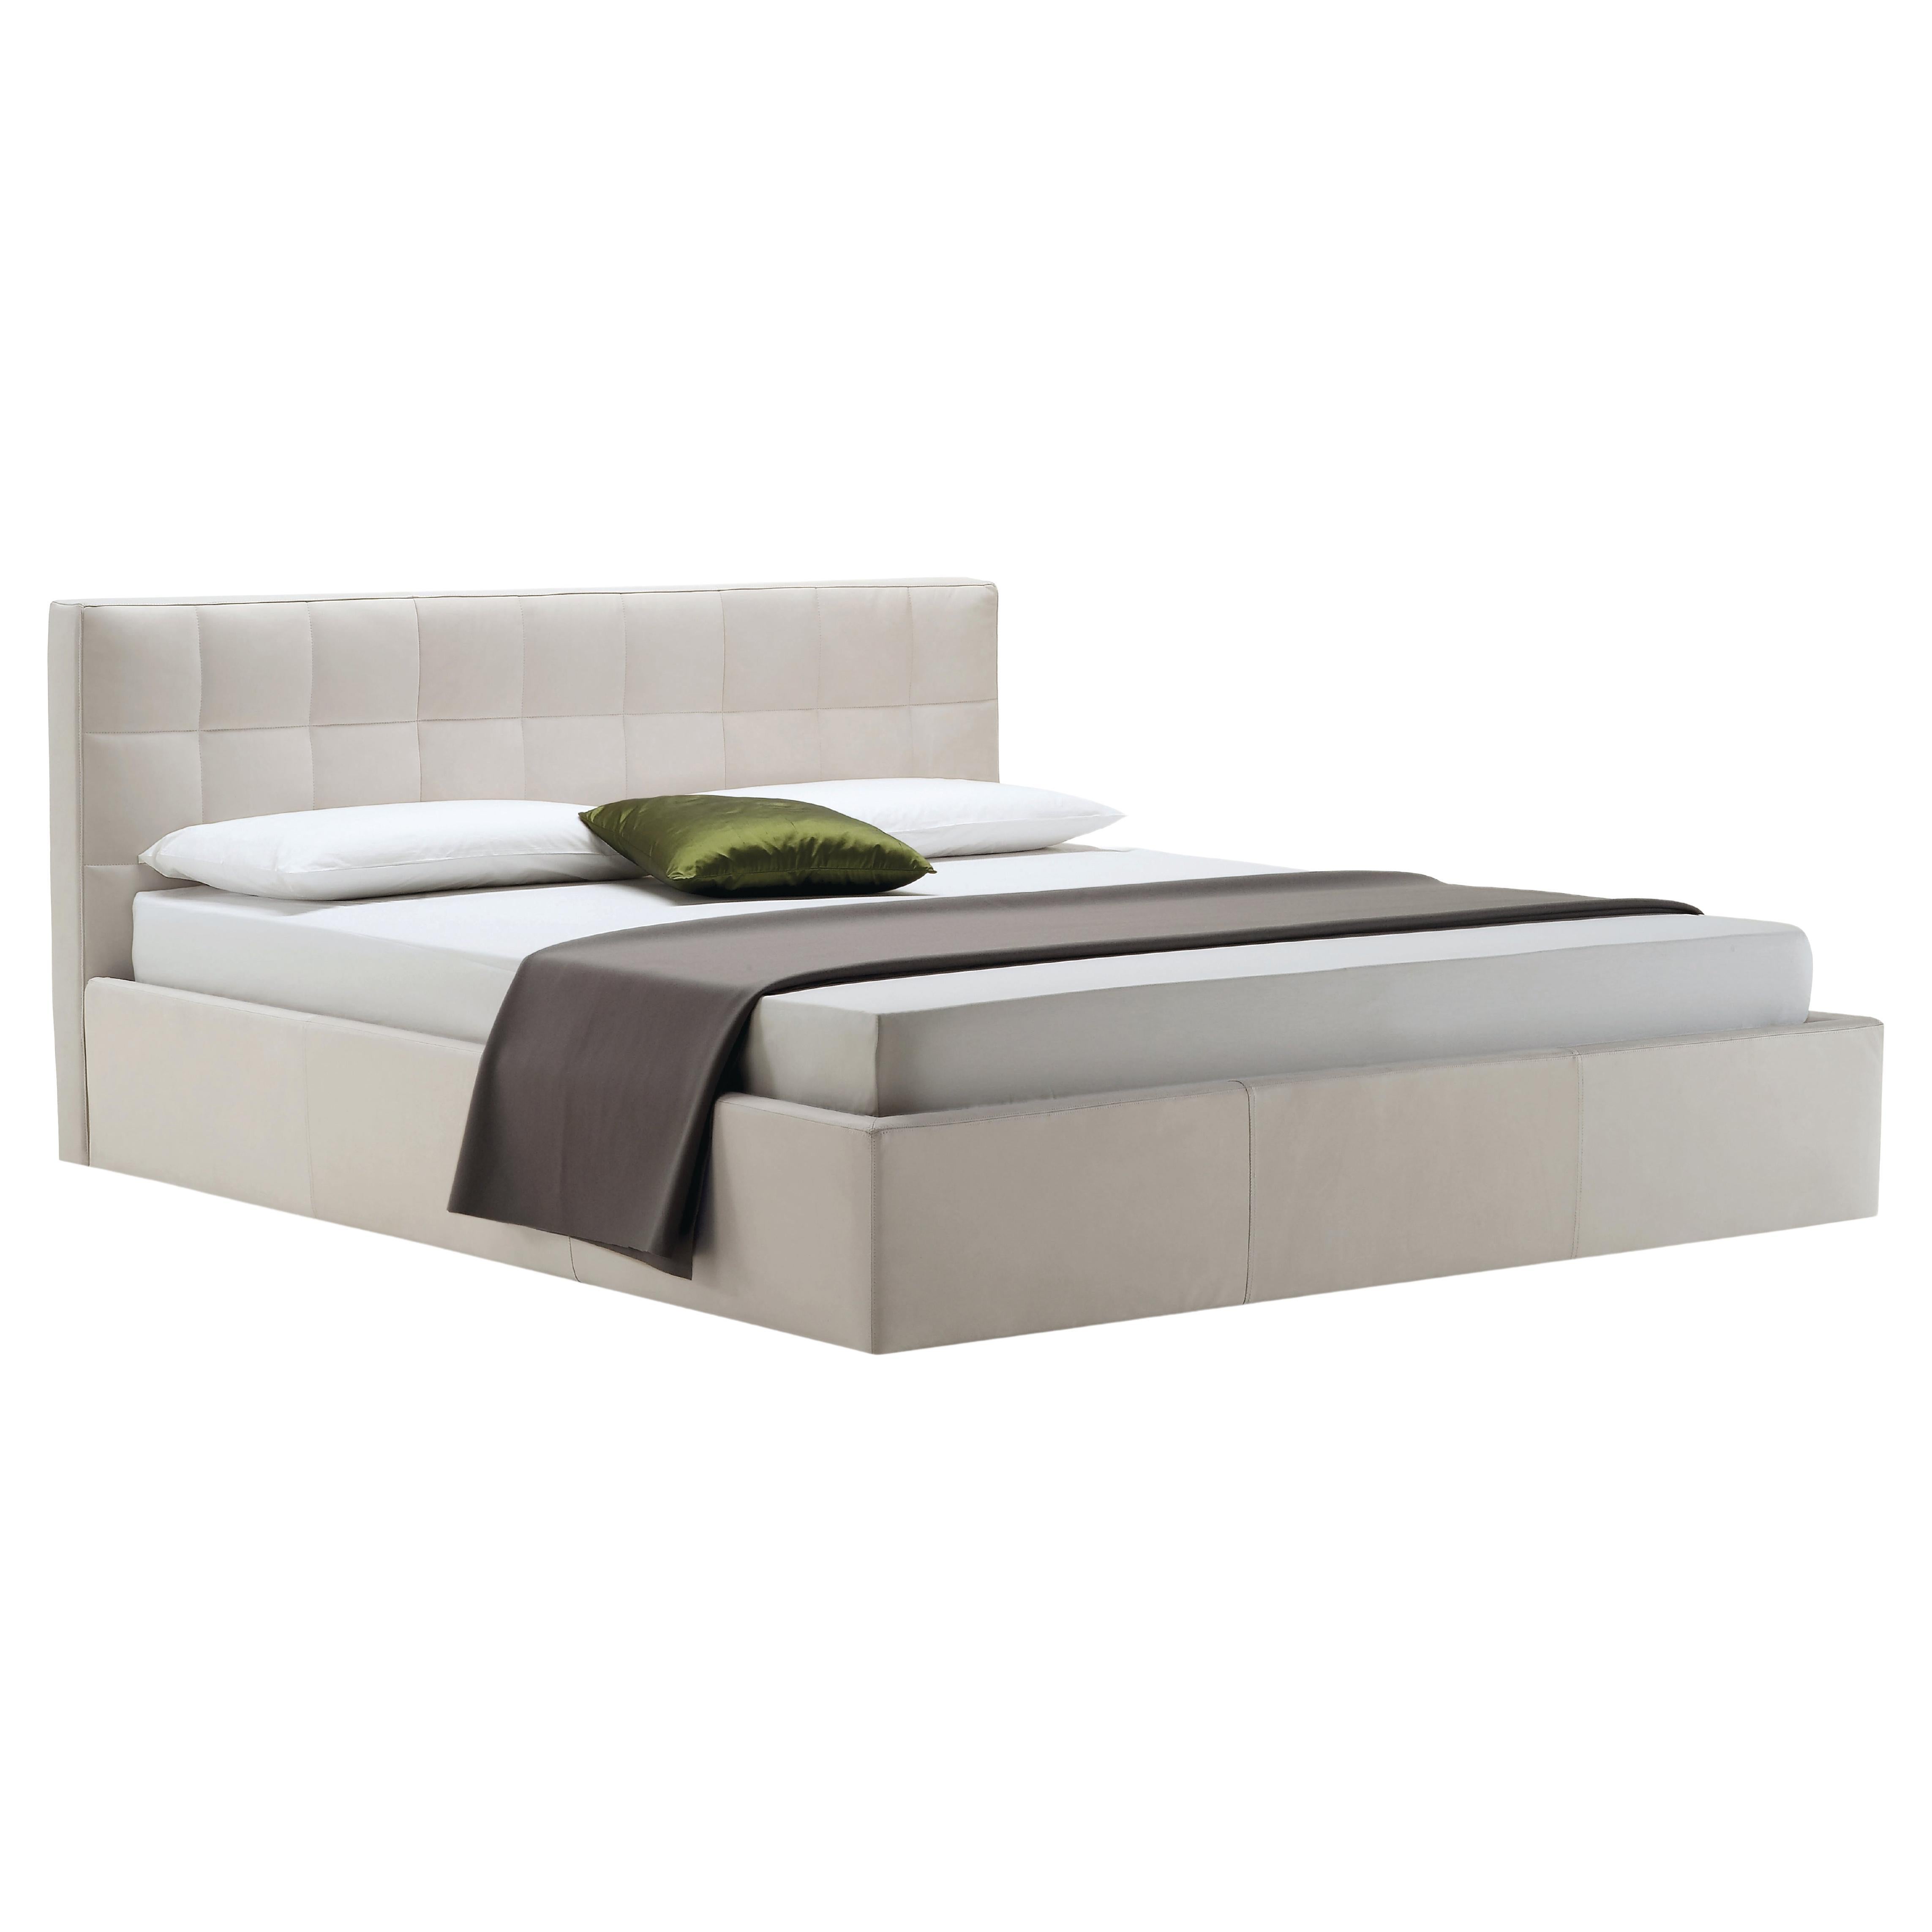 Zanotta King Size Box Bed with Container Unit in Beige Upholstery & Steel Frame For Sale